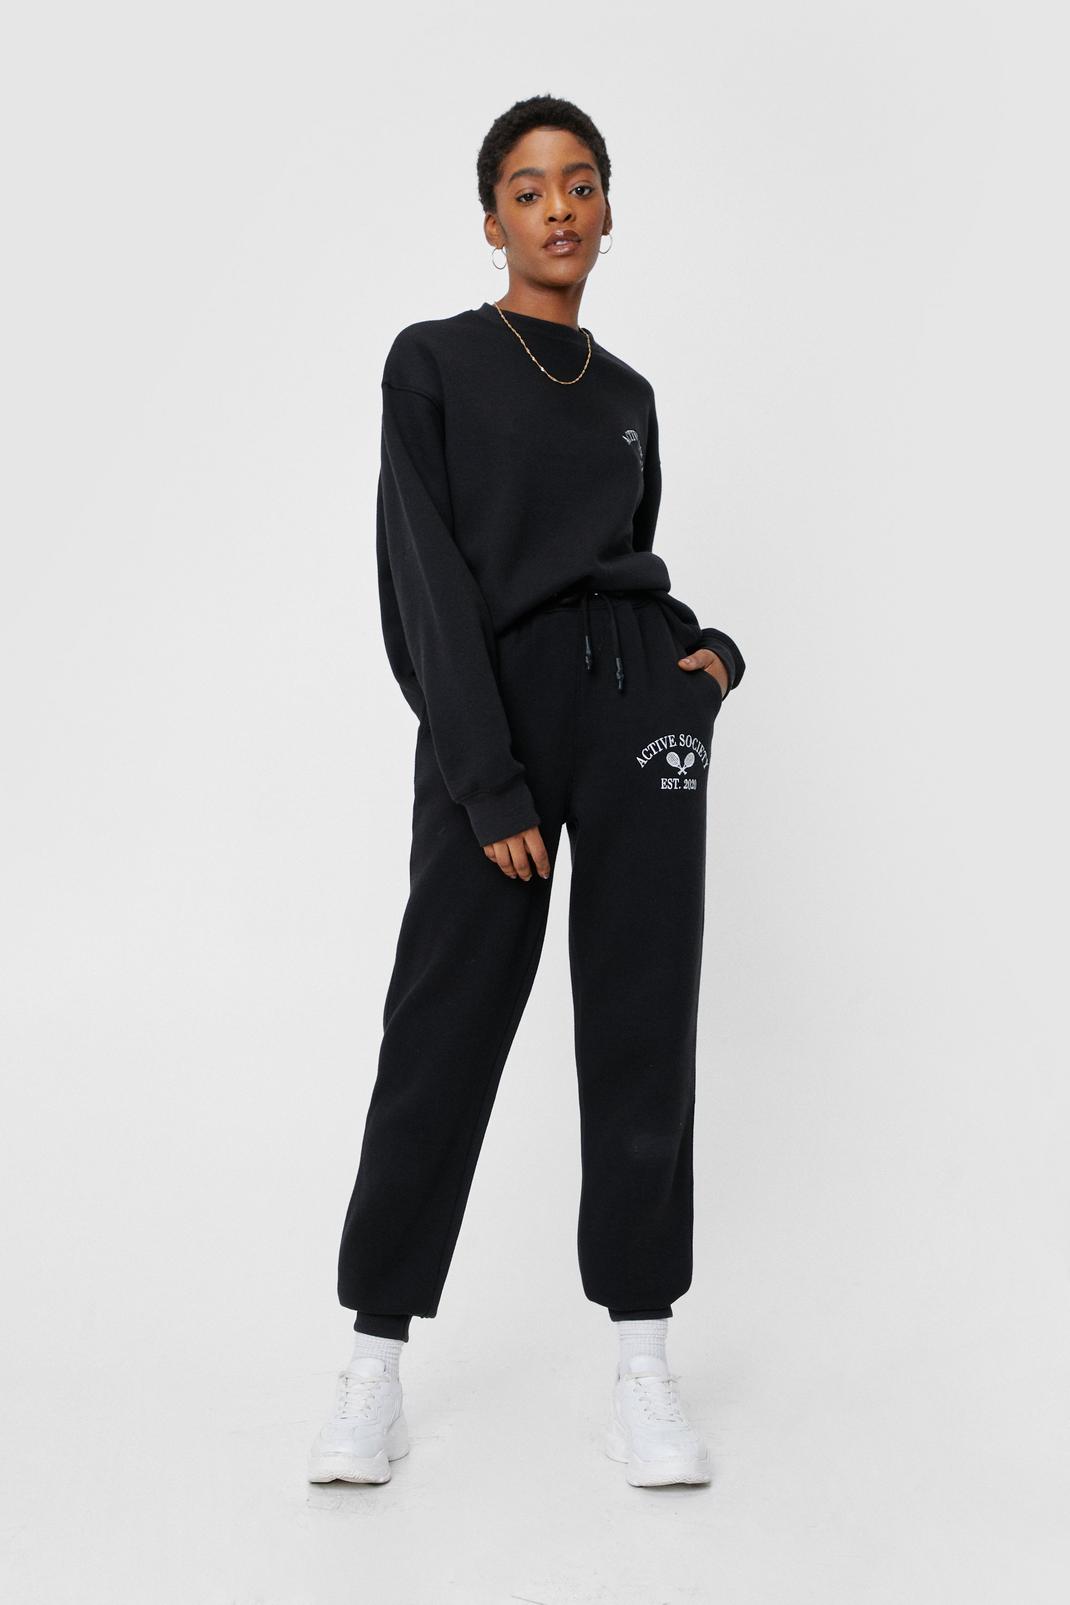 Black Active Society Embroidered Graphic Sweatpants image number 1